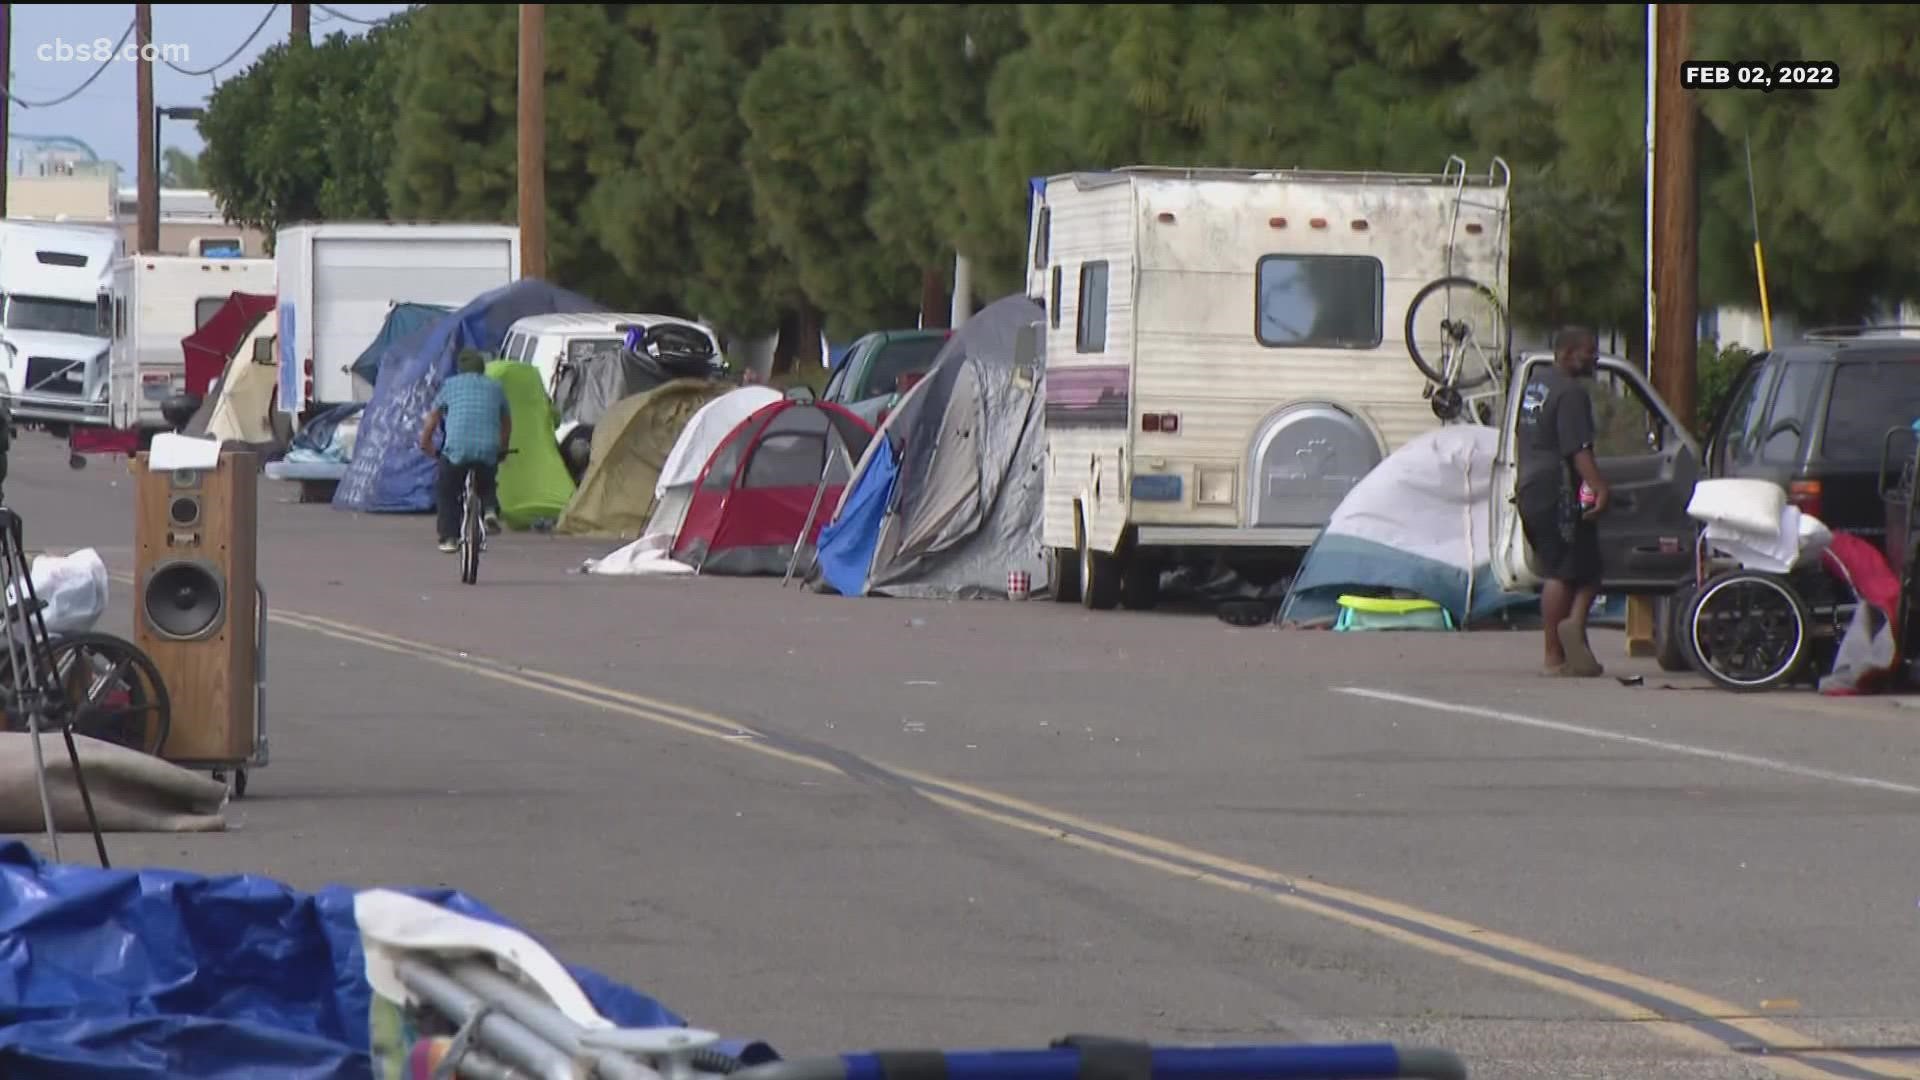 Mayor Todd Gloria said there has been a "concentrated" effort to connect people camping along Sports Arena Boulevard to shelter and social services.